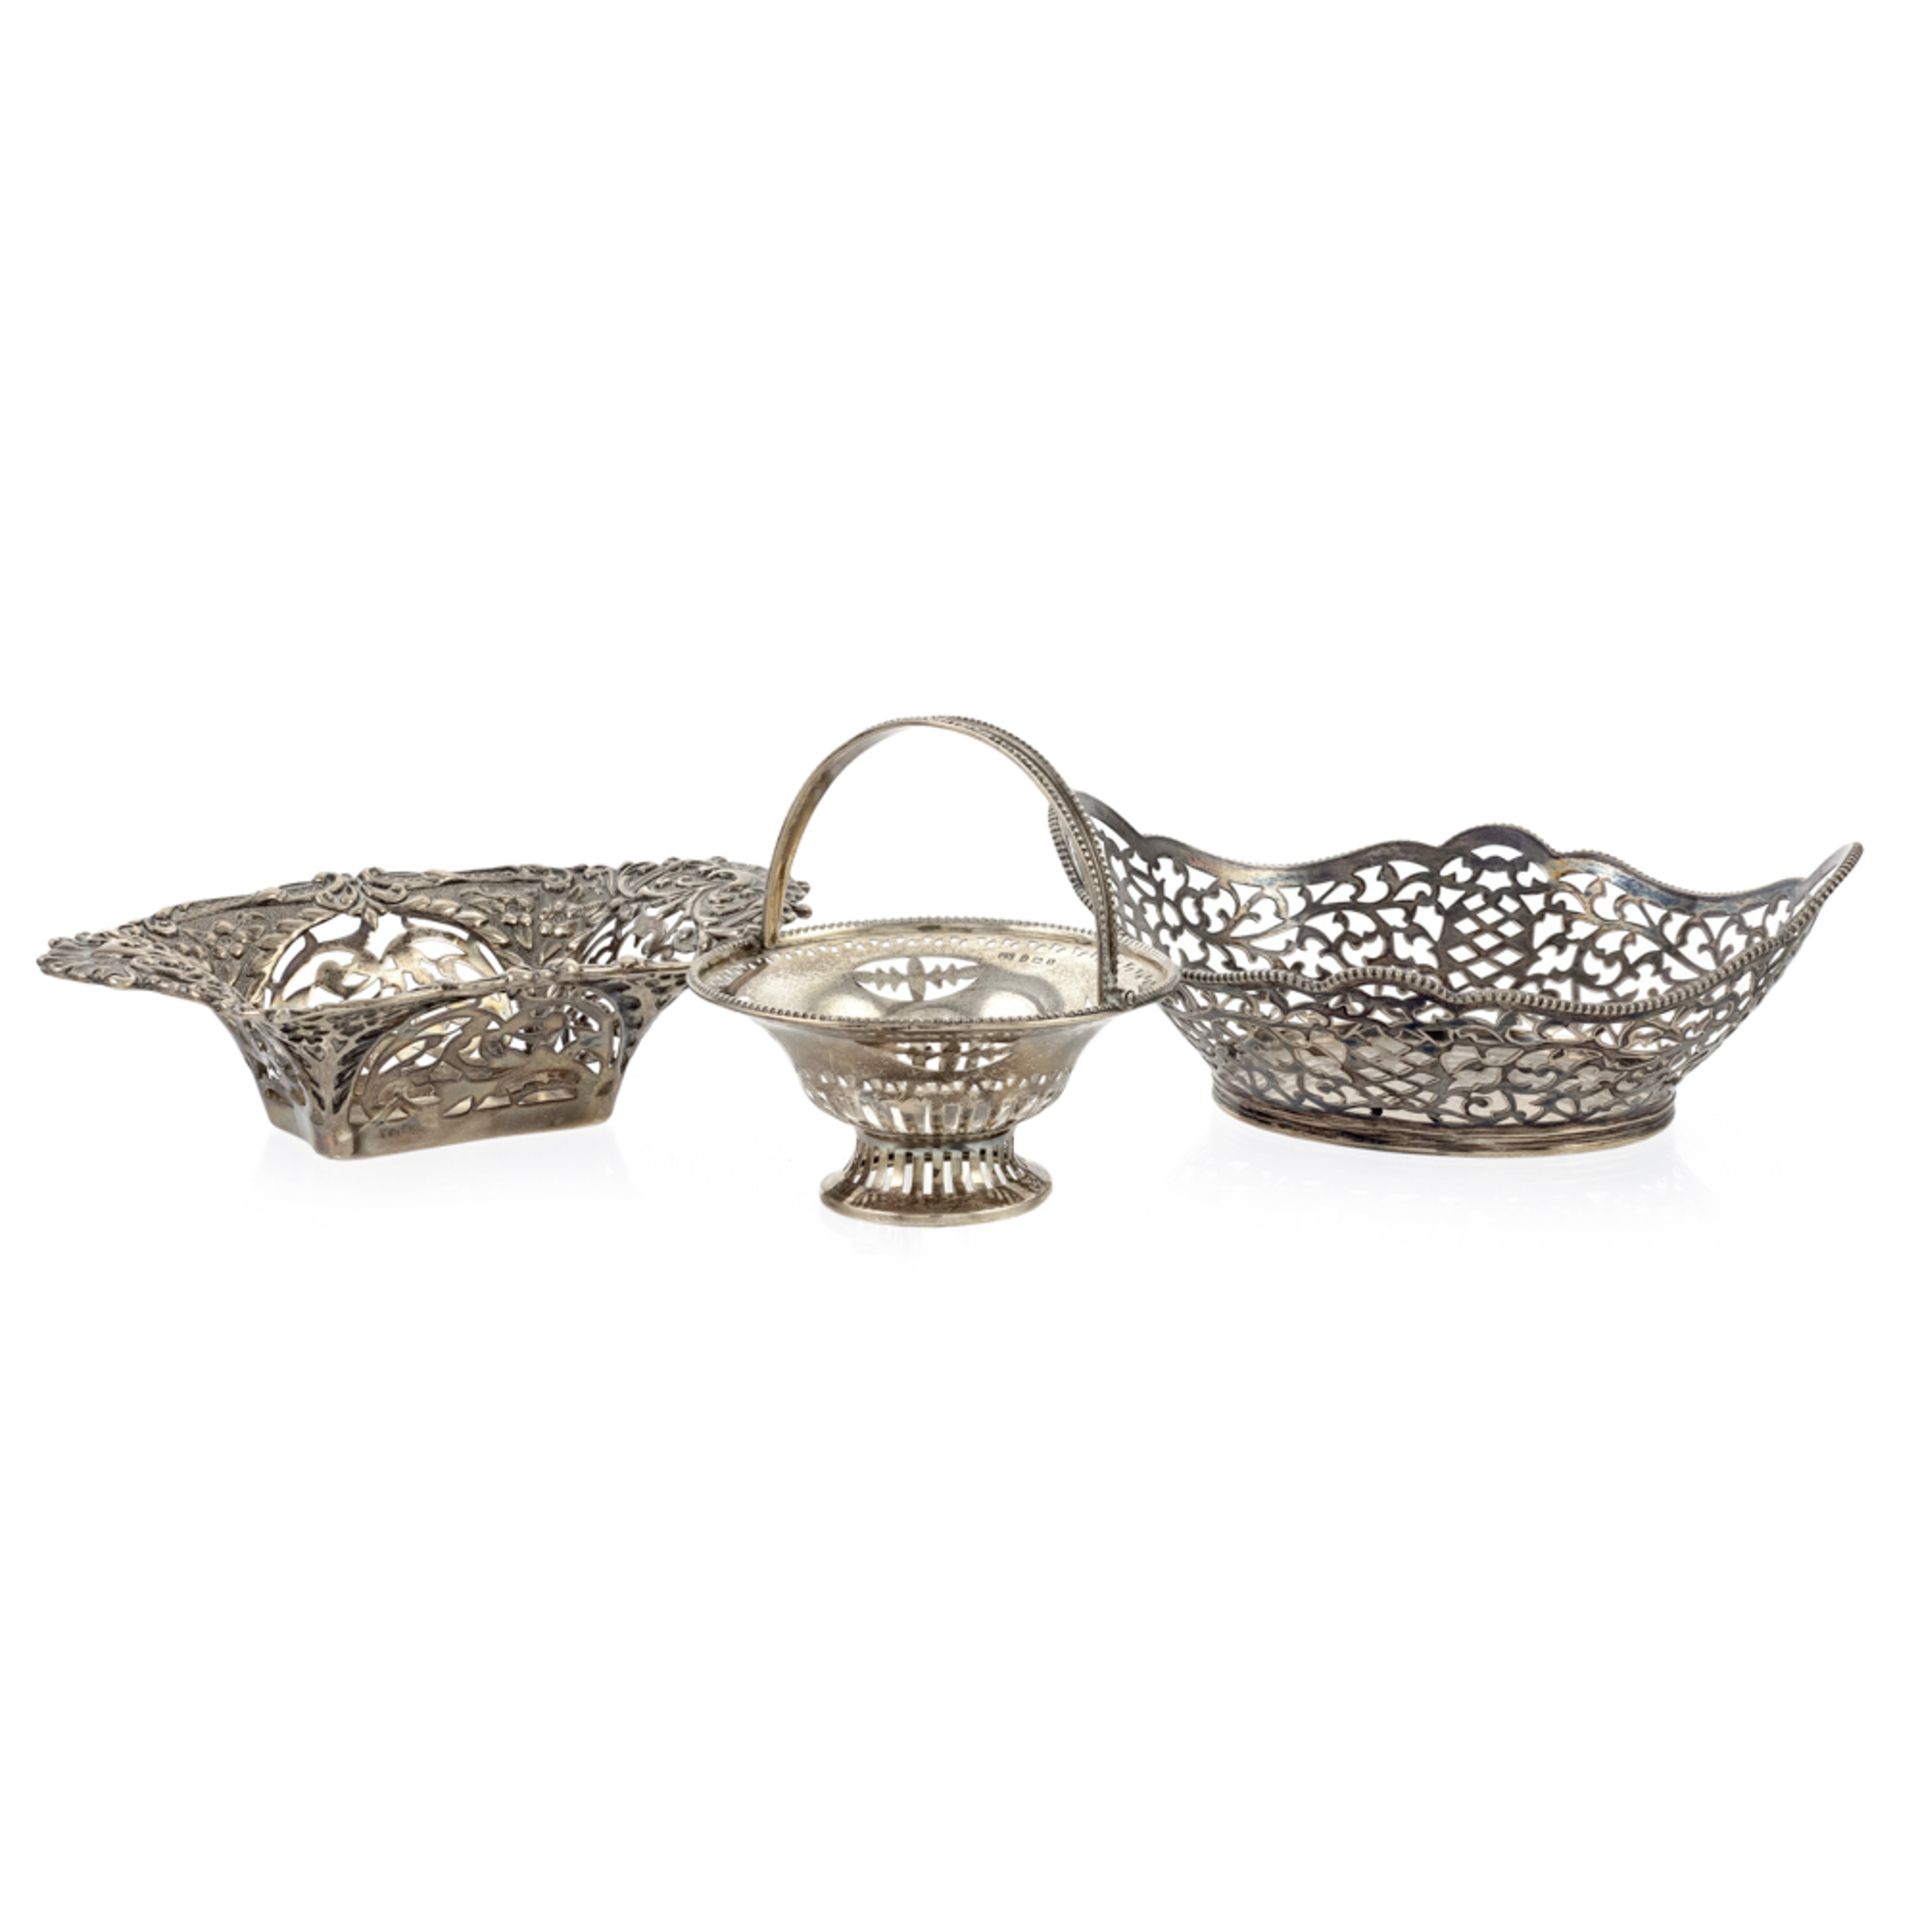 Group of silver baskets (3)